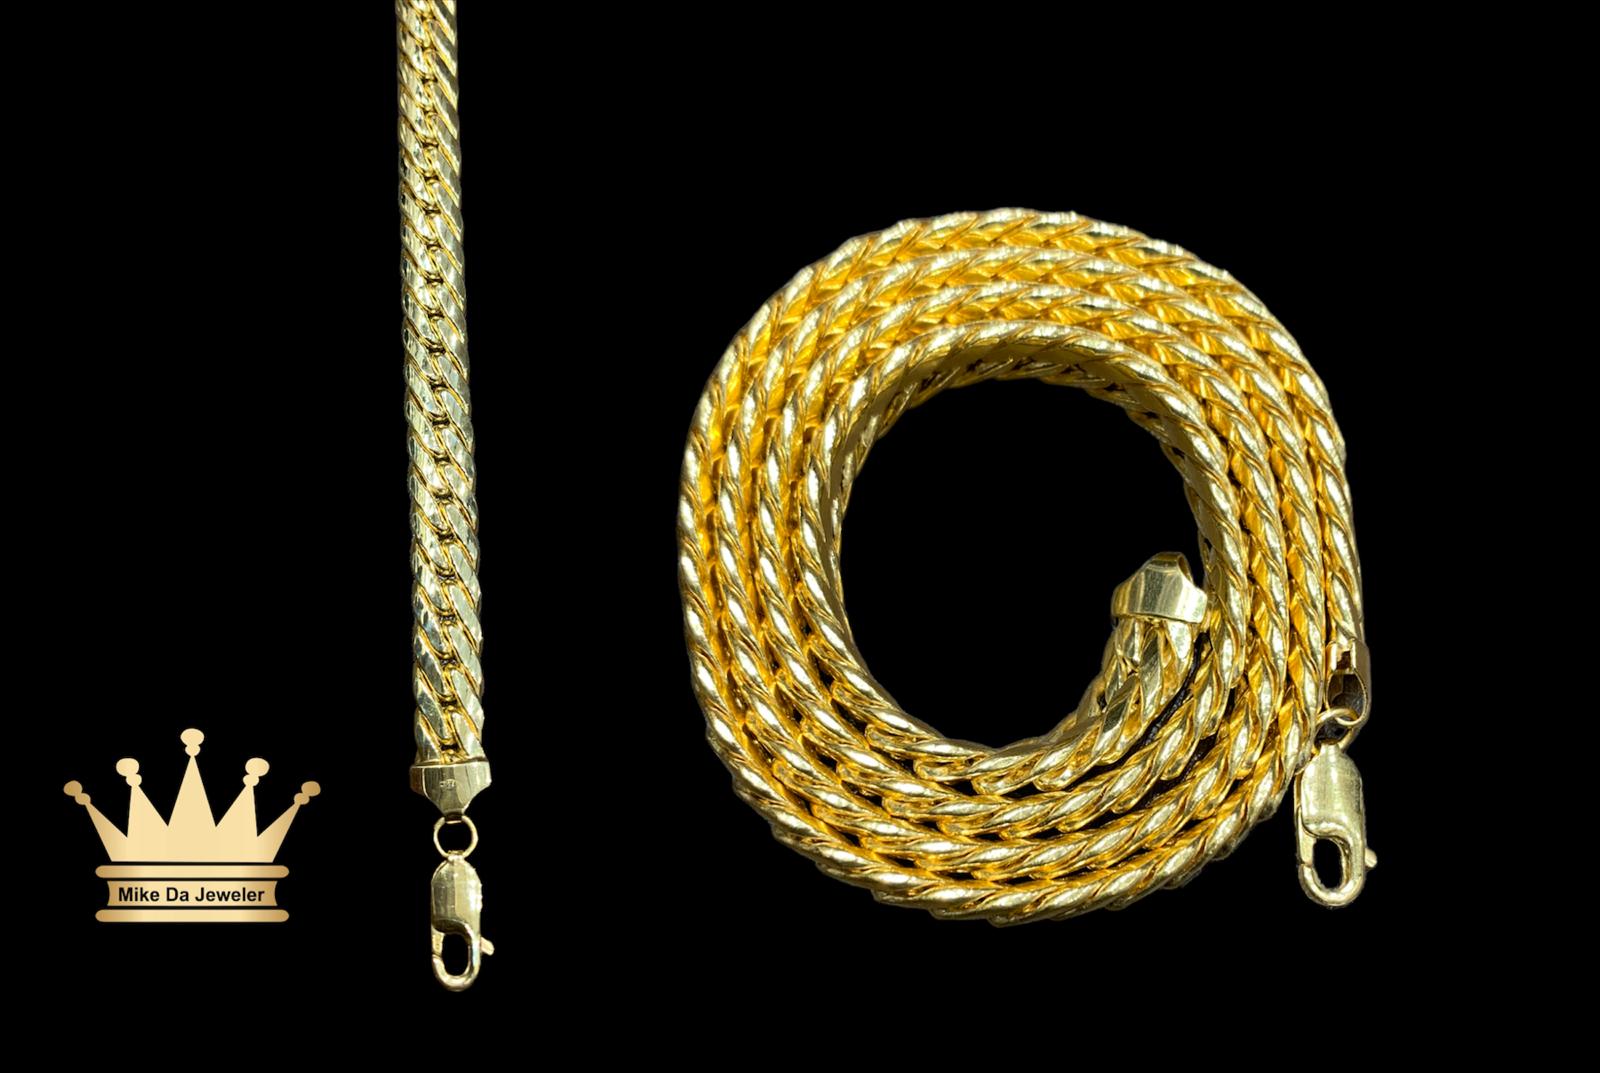 18k hollow double Cuban link  flat chain price $2500 usd weight 24.13 gram 7 mm 22 inches